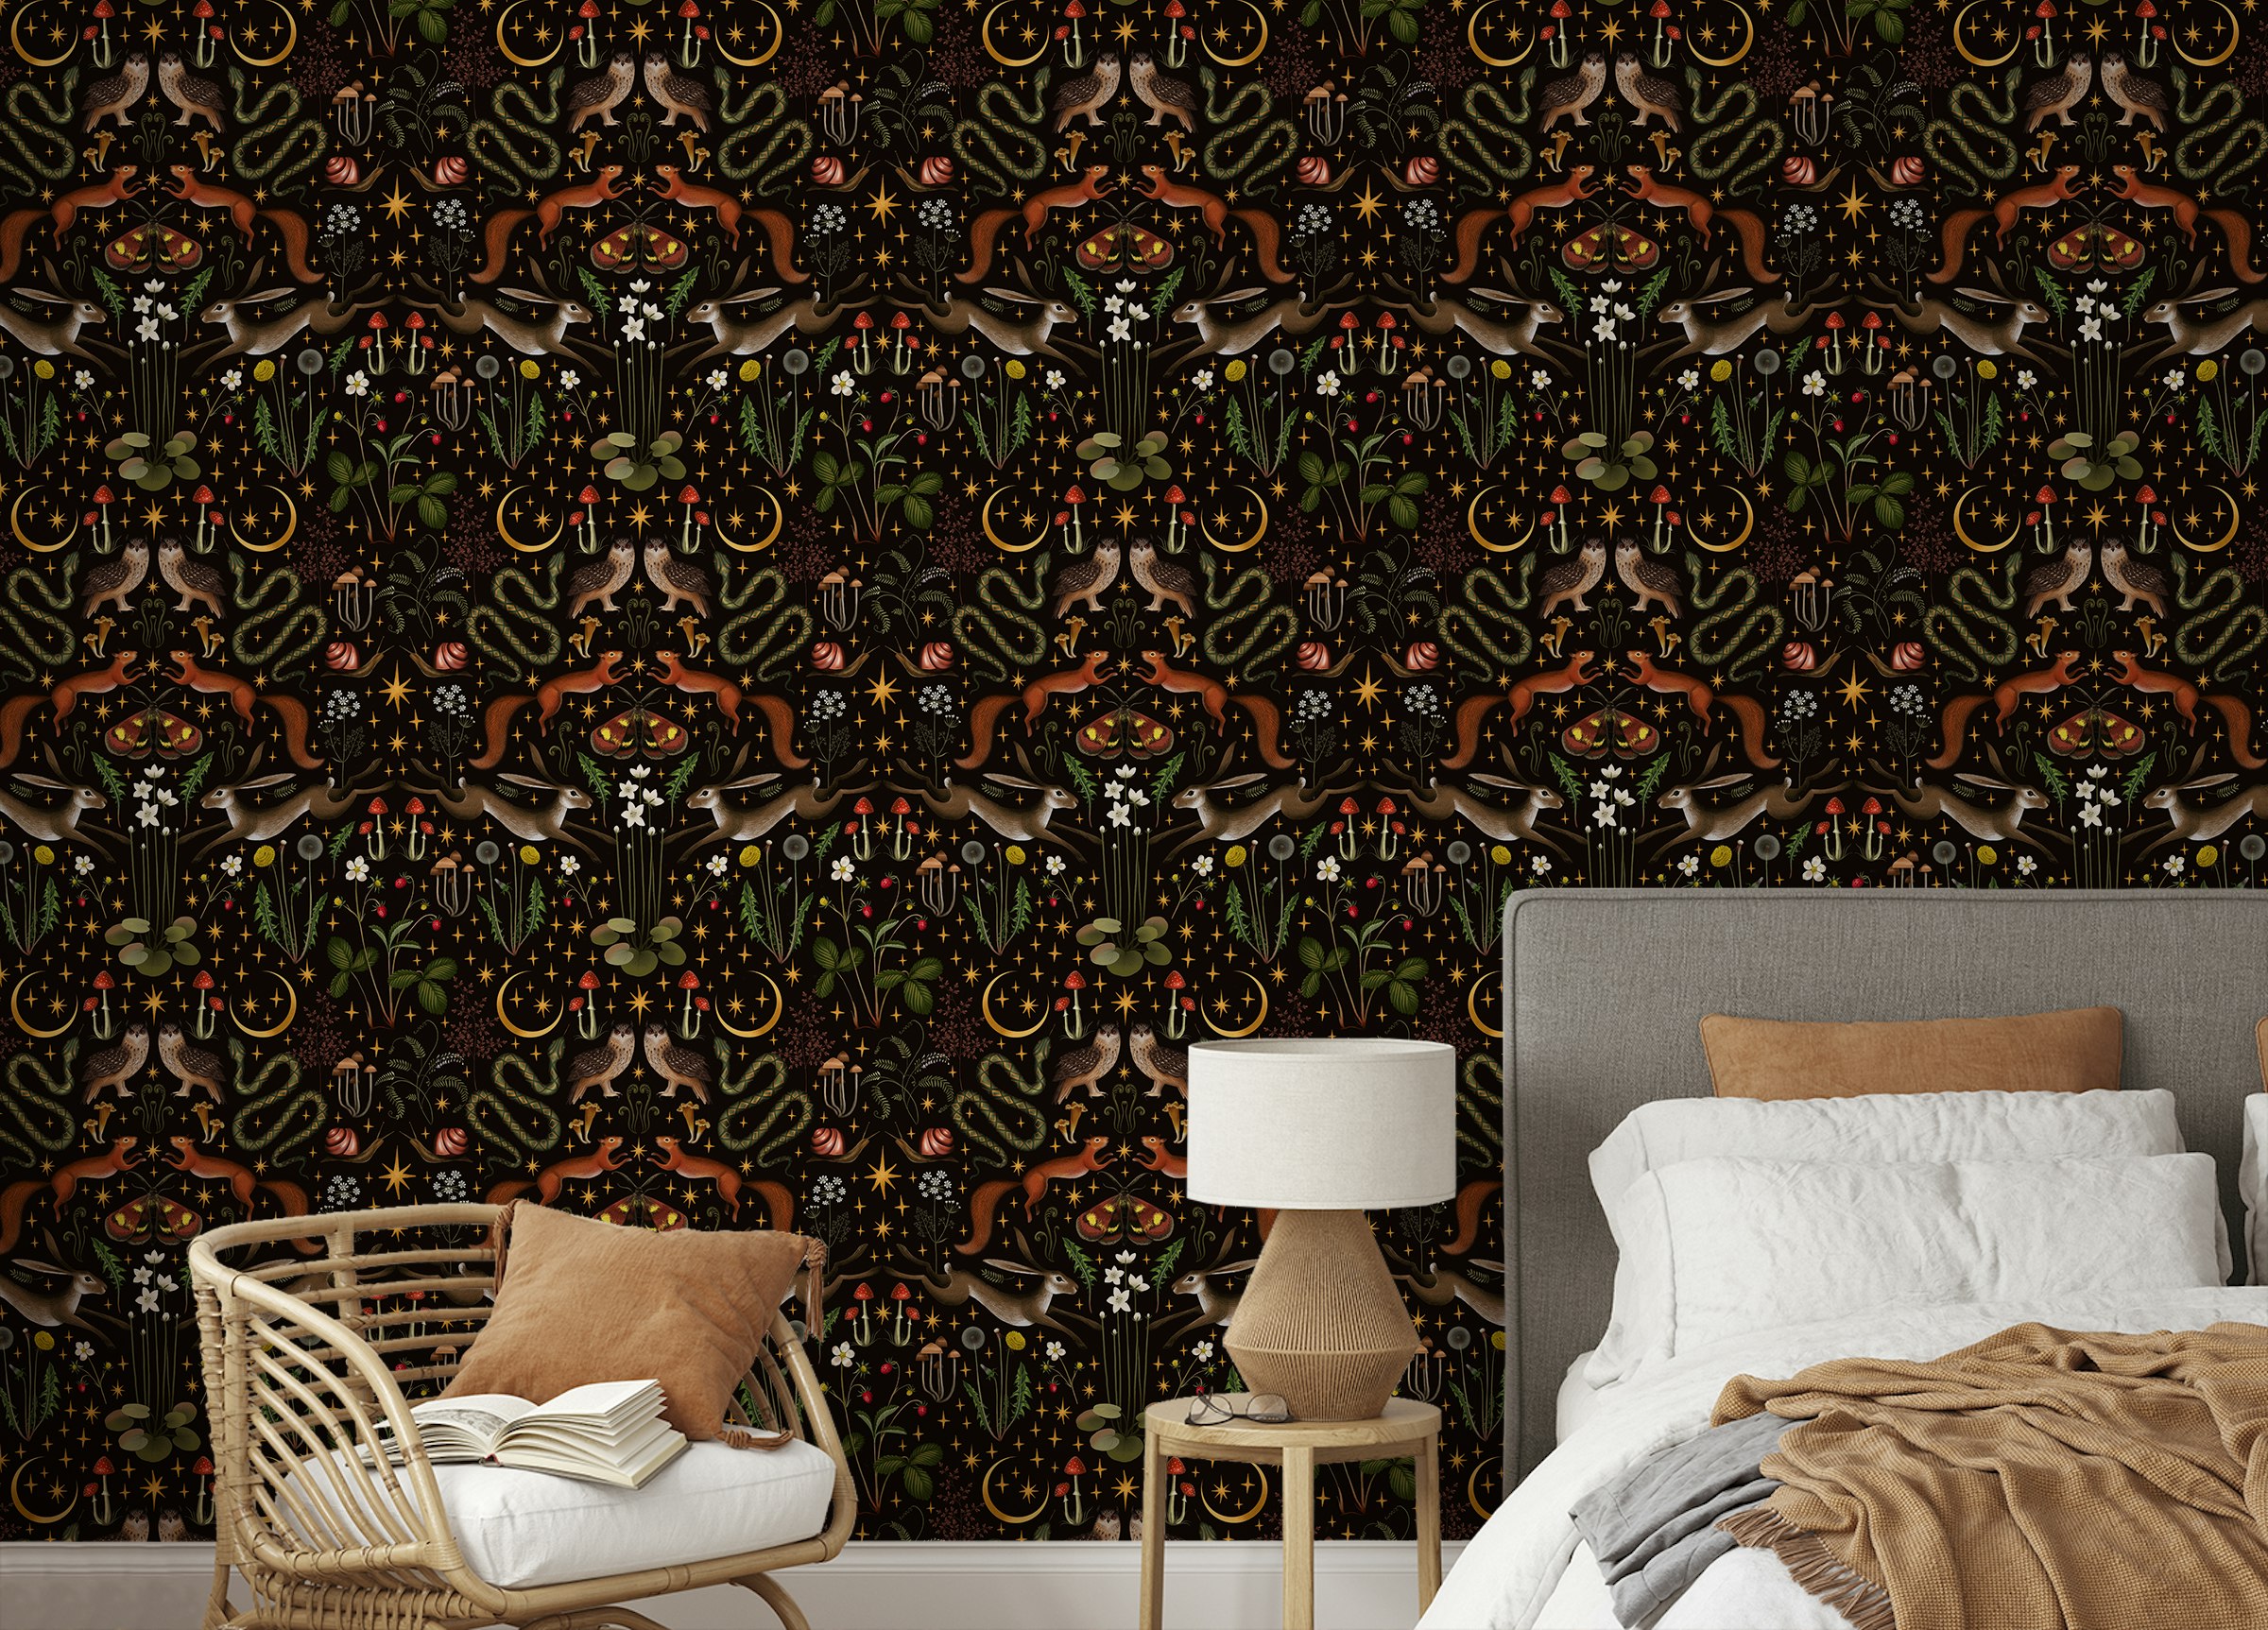 Peel and Stick Owl Flowers and Mushrooms Repeat Pattern Wallpaper